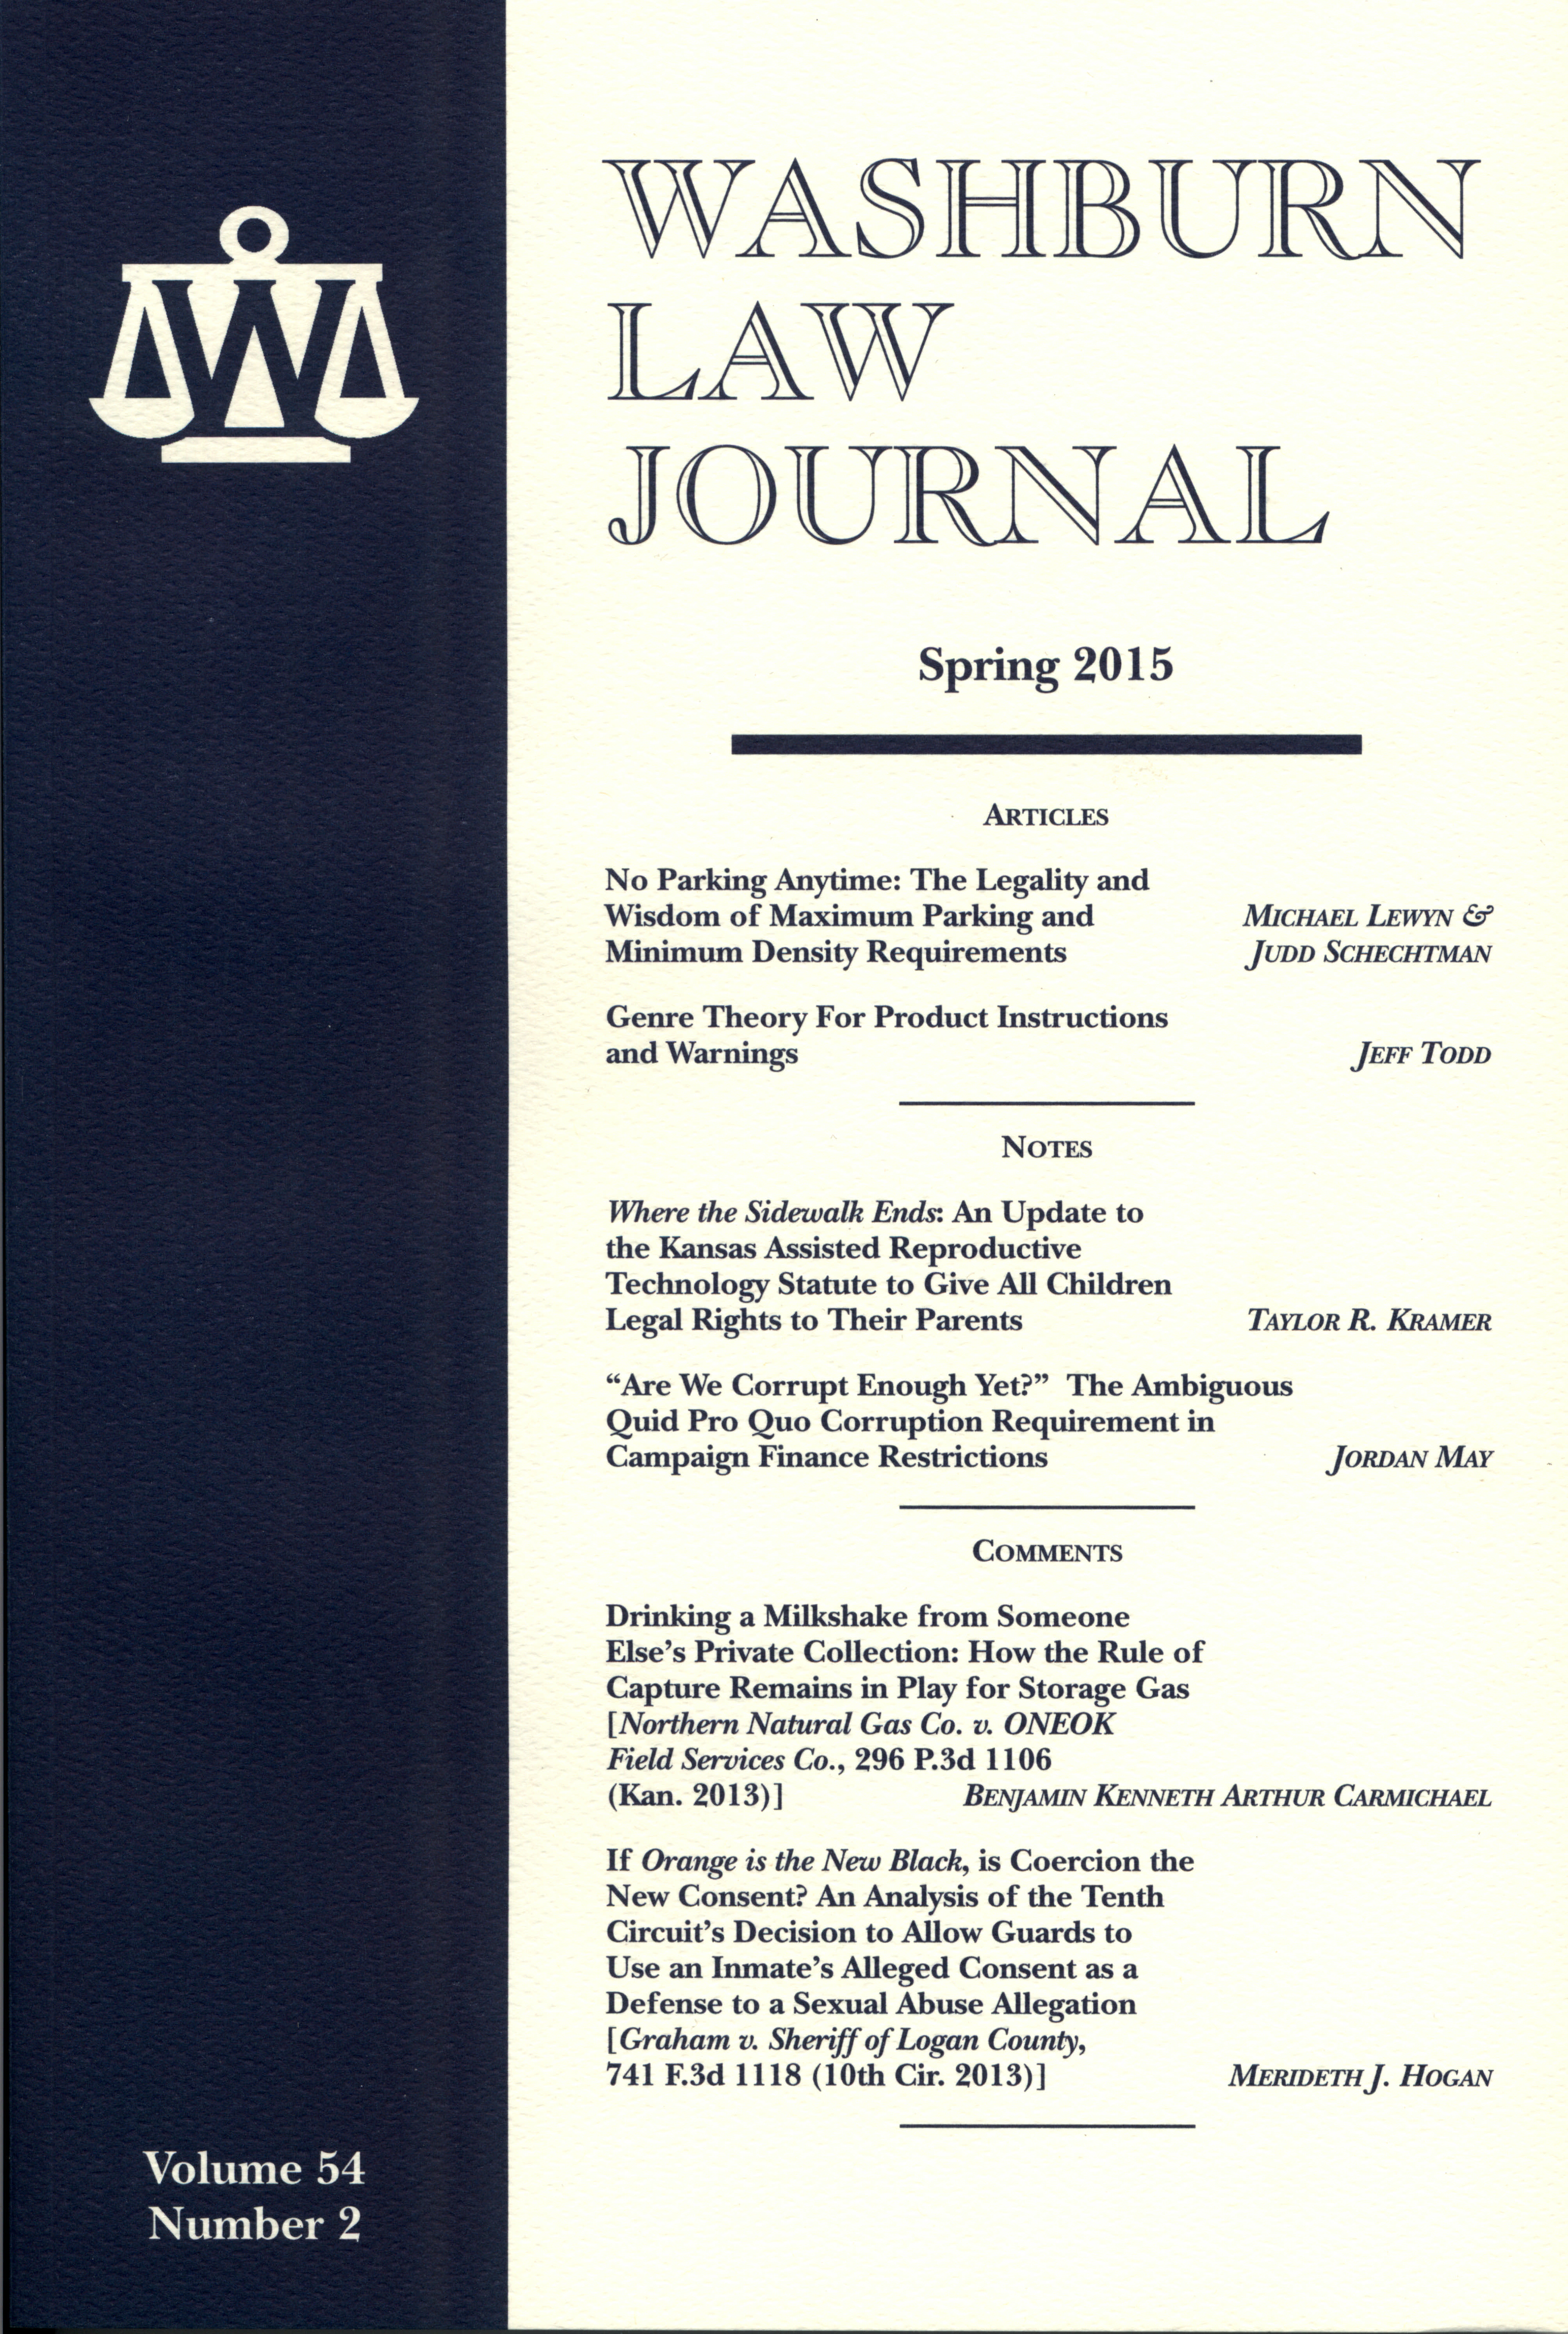 Graphic: Cover of volume 54, number 2 of Washburn Law Journal.